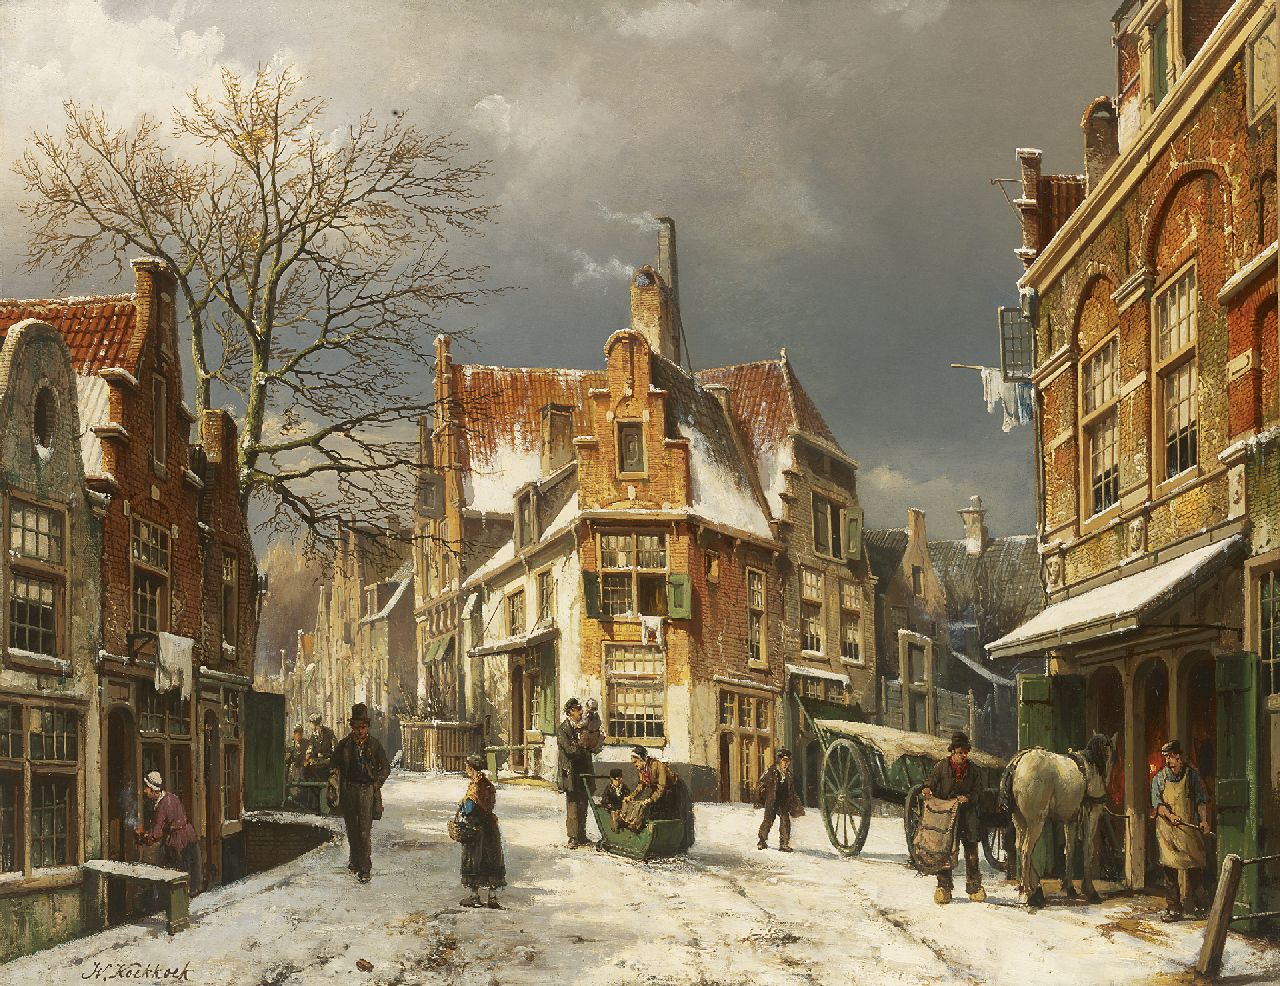 Koekkoek W.  | Willem Koekkoek, A busy day in winter in Enkhuizen, oil on canvas 54.3 x 69.6 cm, signed l.l. and dated 13 januari 1892 on label on stretcher